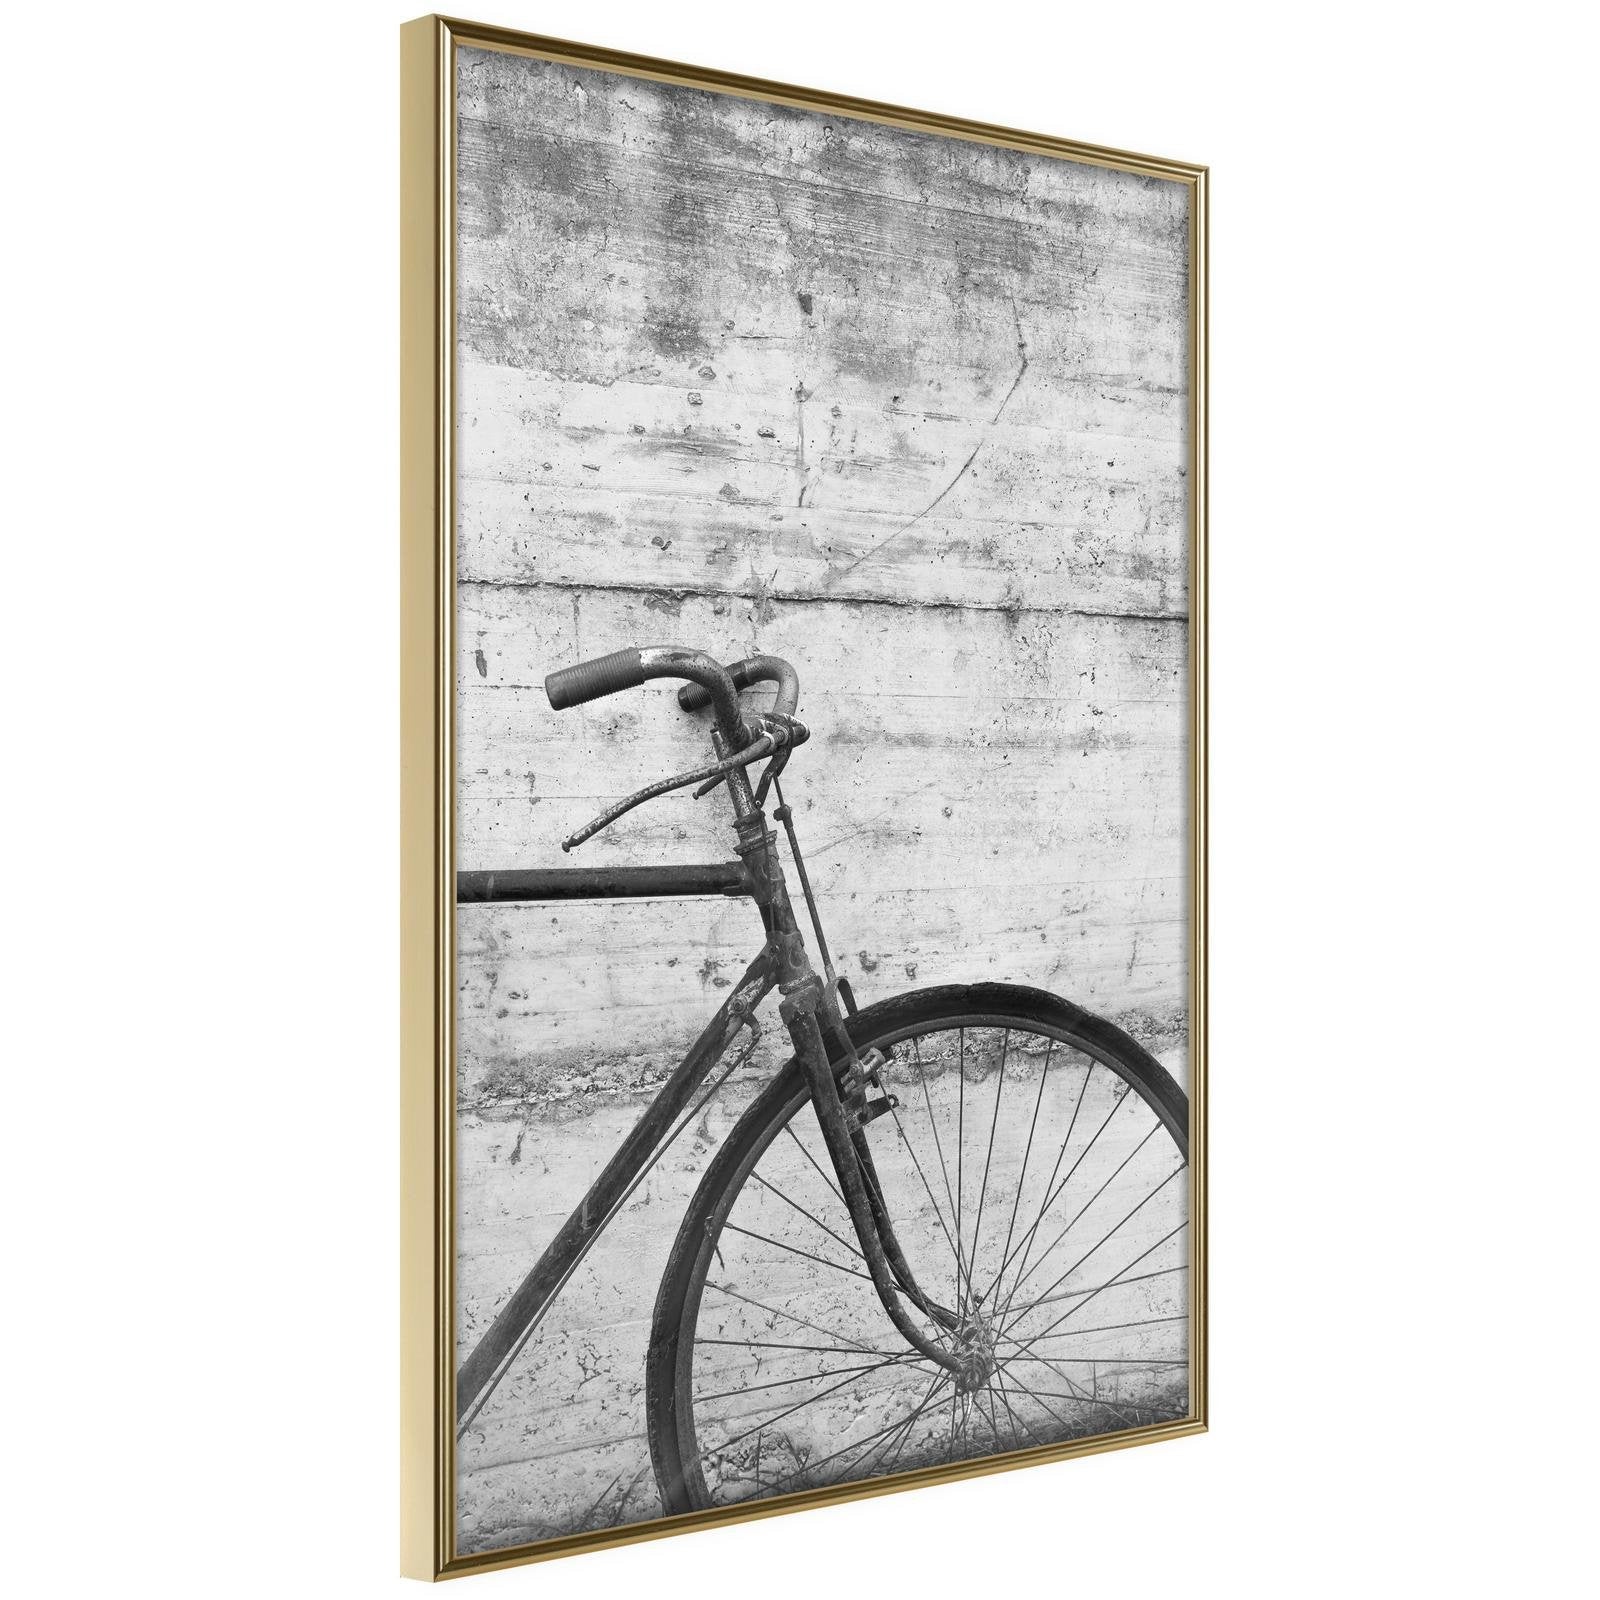 Inramad Poster / Tavla - Bicycle Leaning Against the Wall-Poster Inramad-Artgeist-20x30-Guldram-peaceofhome.se